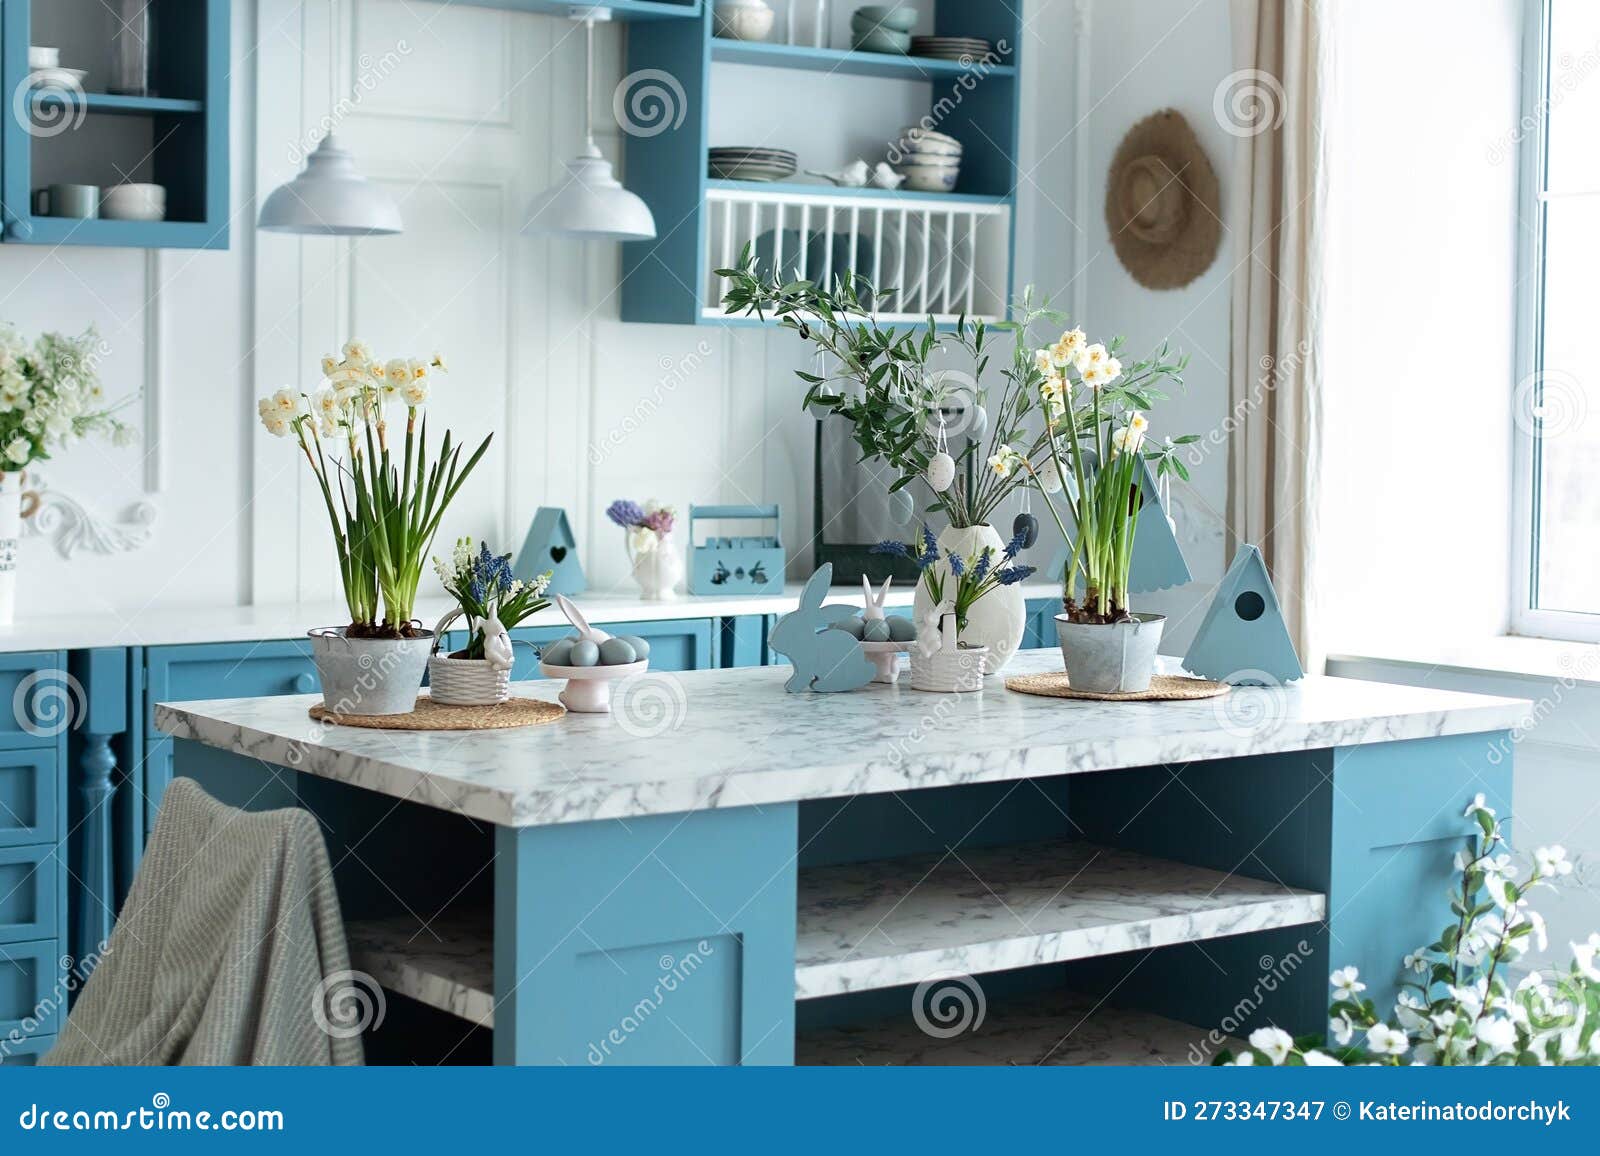 https://thumbs.dreamstime.com/z/wooden-kitchen-easter-decor-cozy-home-decor-kitchen-utensils-dishes-plate-table-kitchen-island-dining-room-blue-273347347.jpg